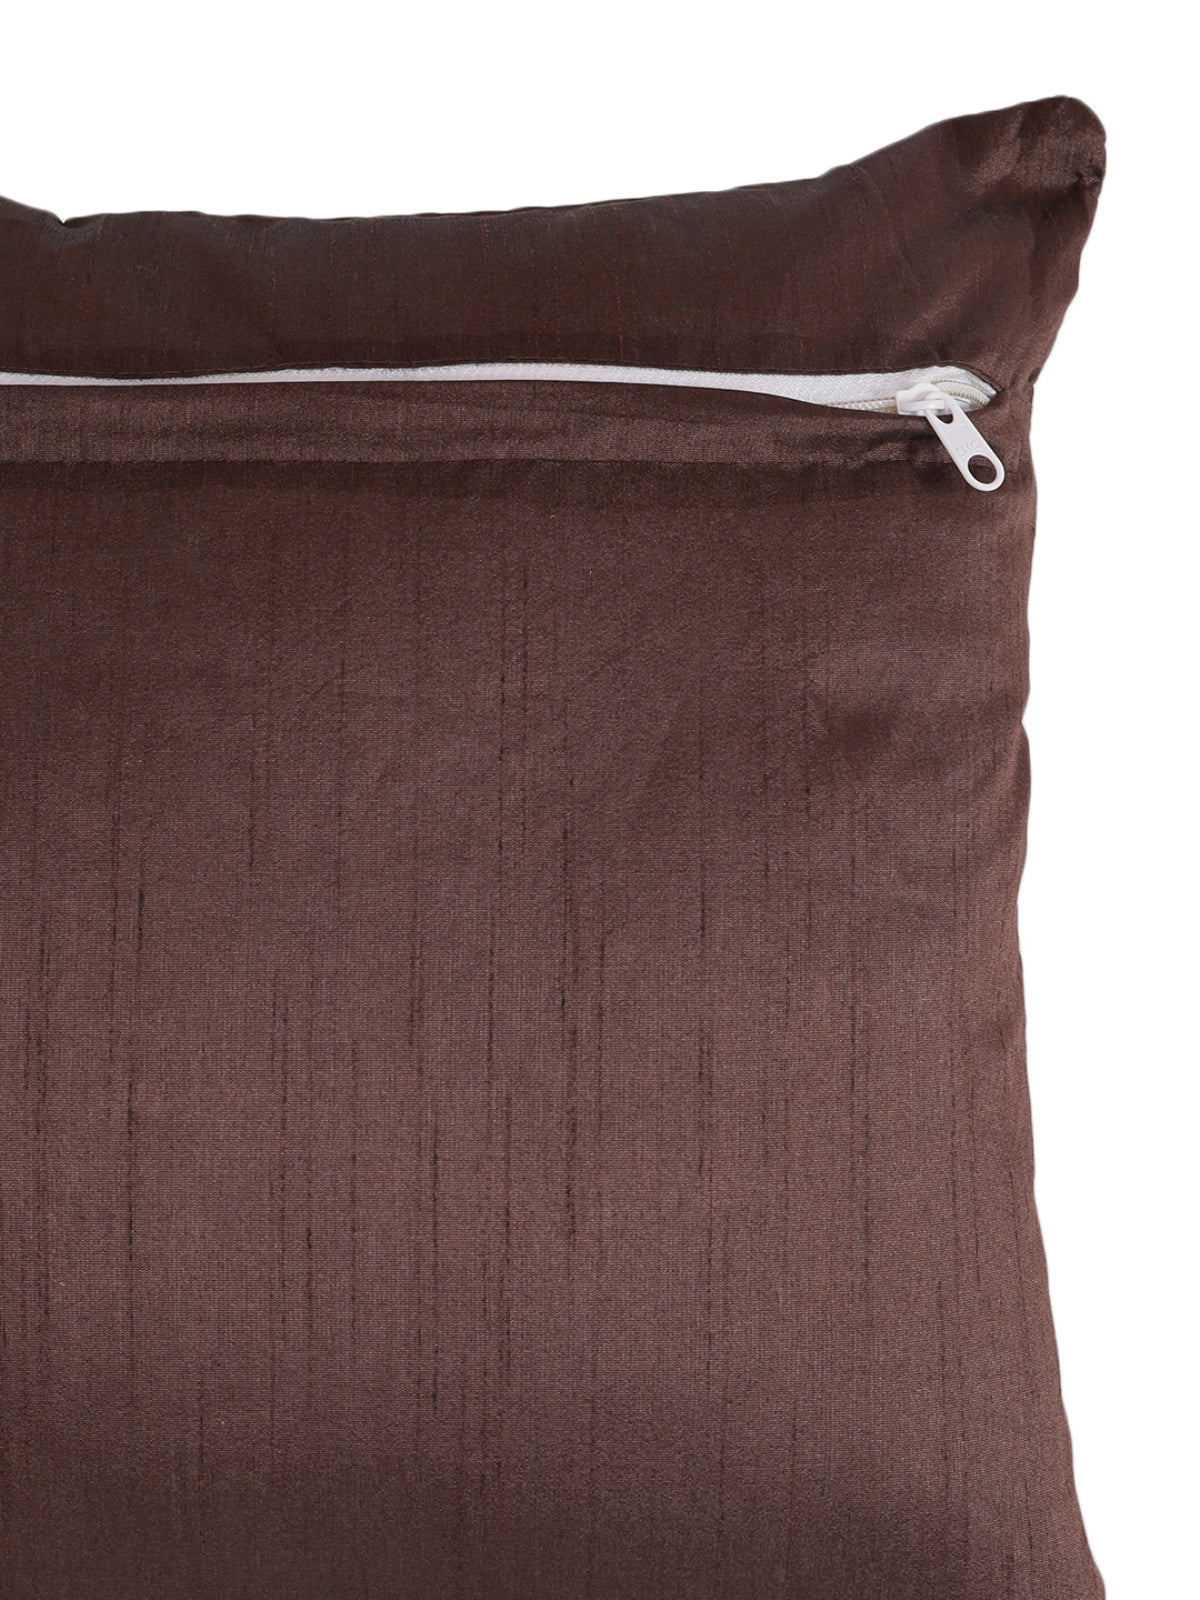 Coffee Brown Set of 5 Polyester 16 Inch x 16 Inch Cushion Covers